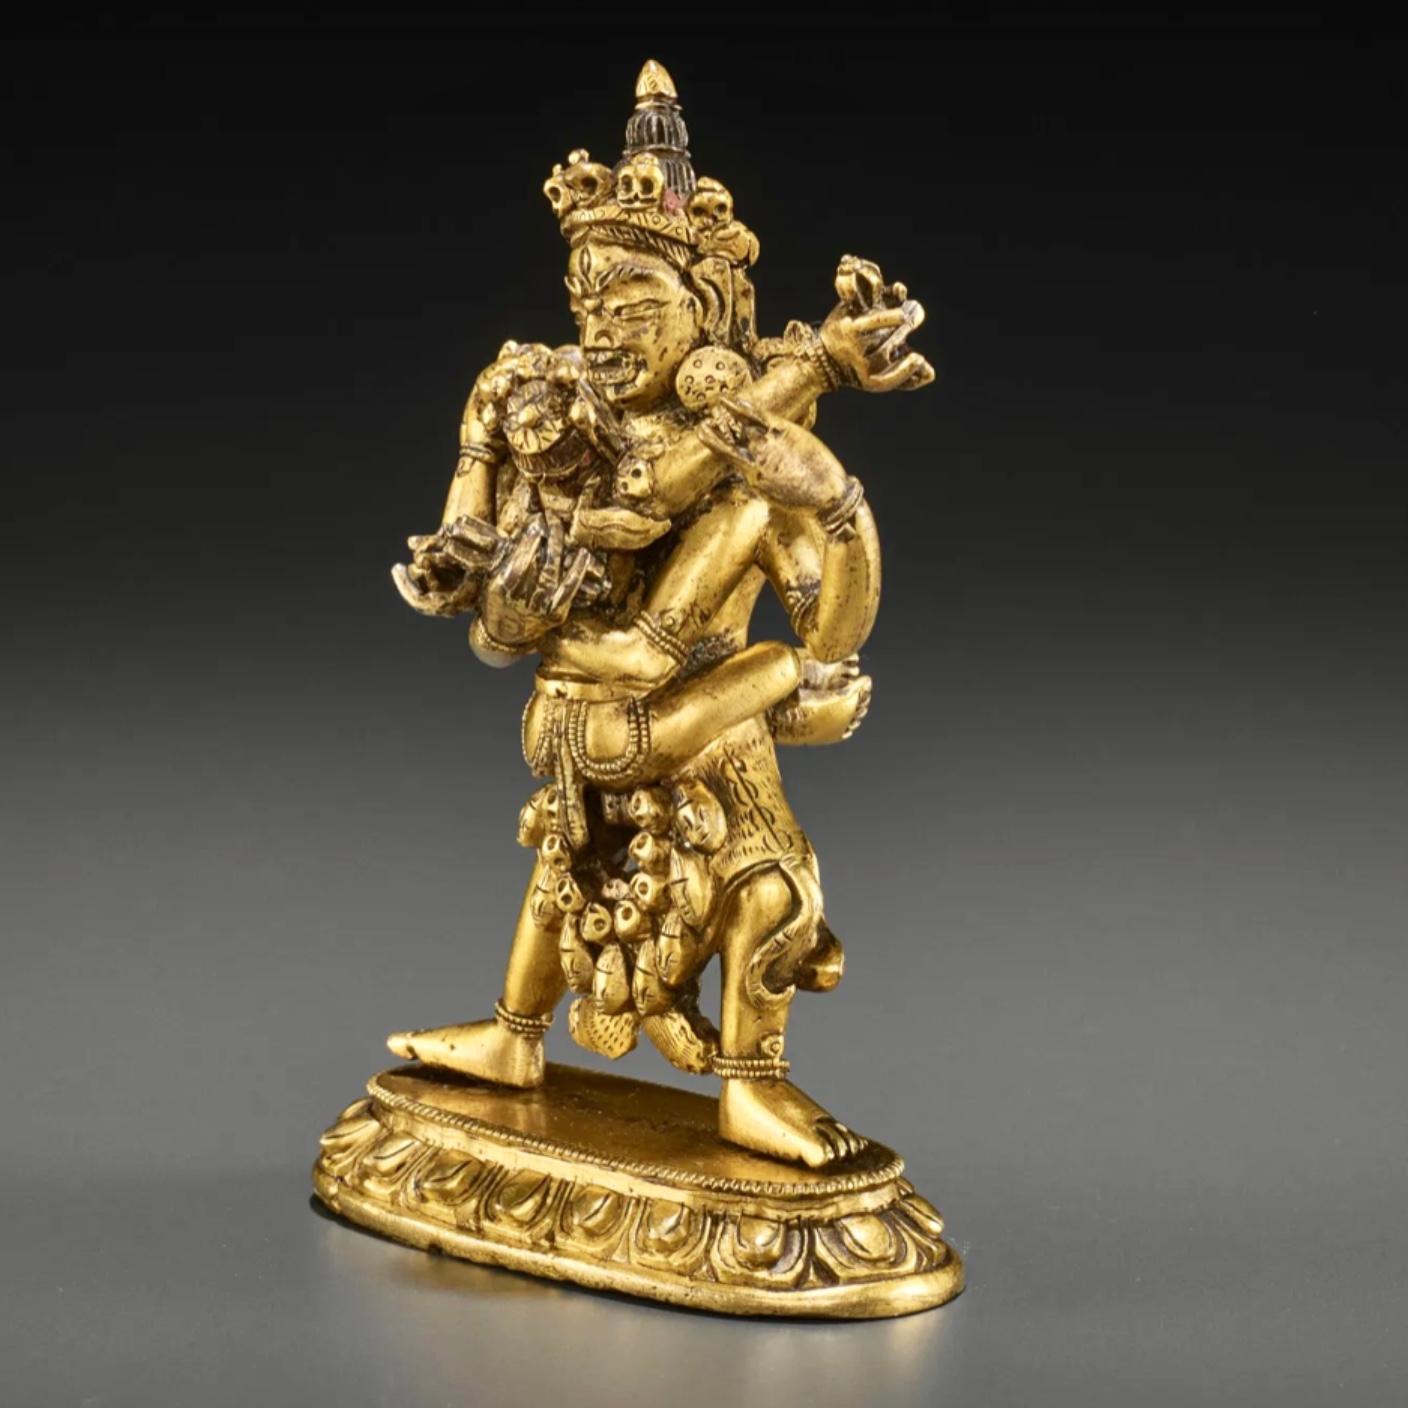 A gilt bronze figure of Chakrasamvara and Vajravahari, 17th-18th century

Tibet, 18th century. The two in embrace striding in alidhasana atop a lotus base with a beaded edge. He is holding vajra and ghanta and is adorned with a long garland of